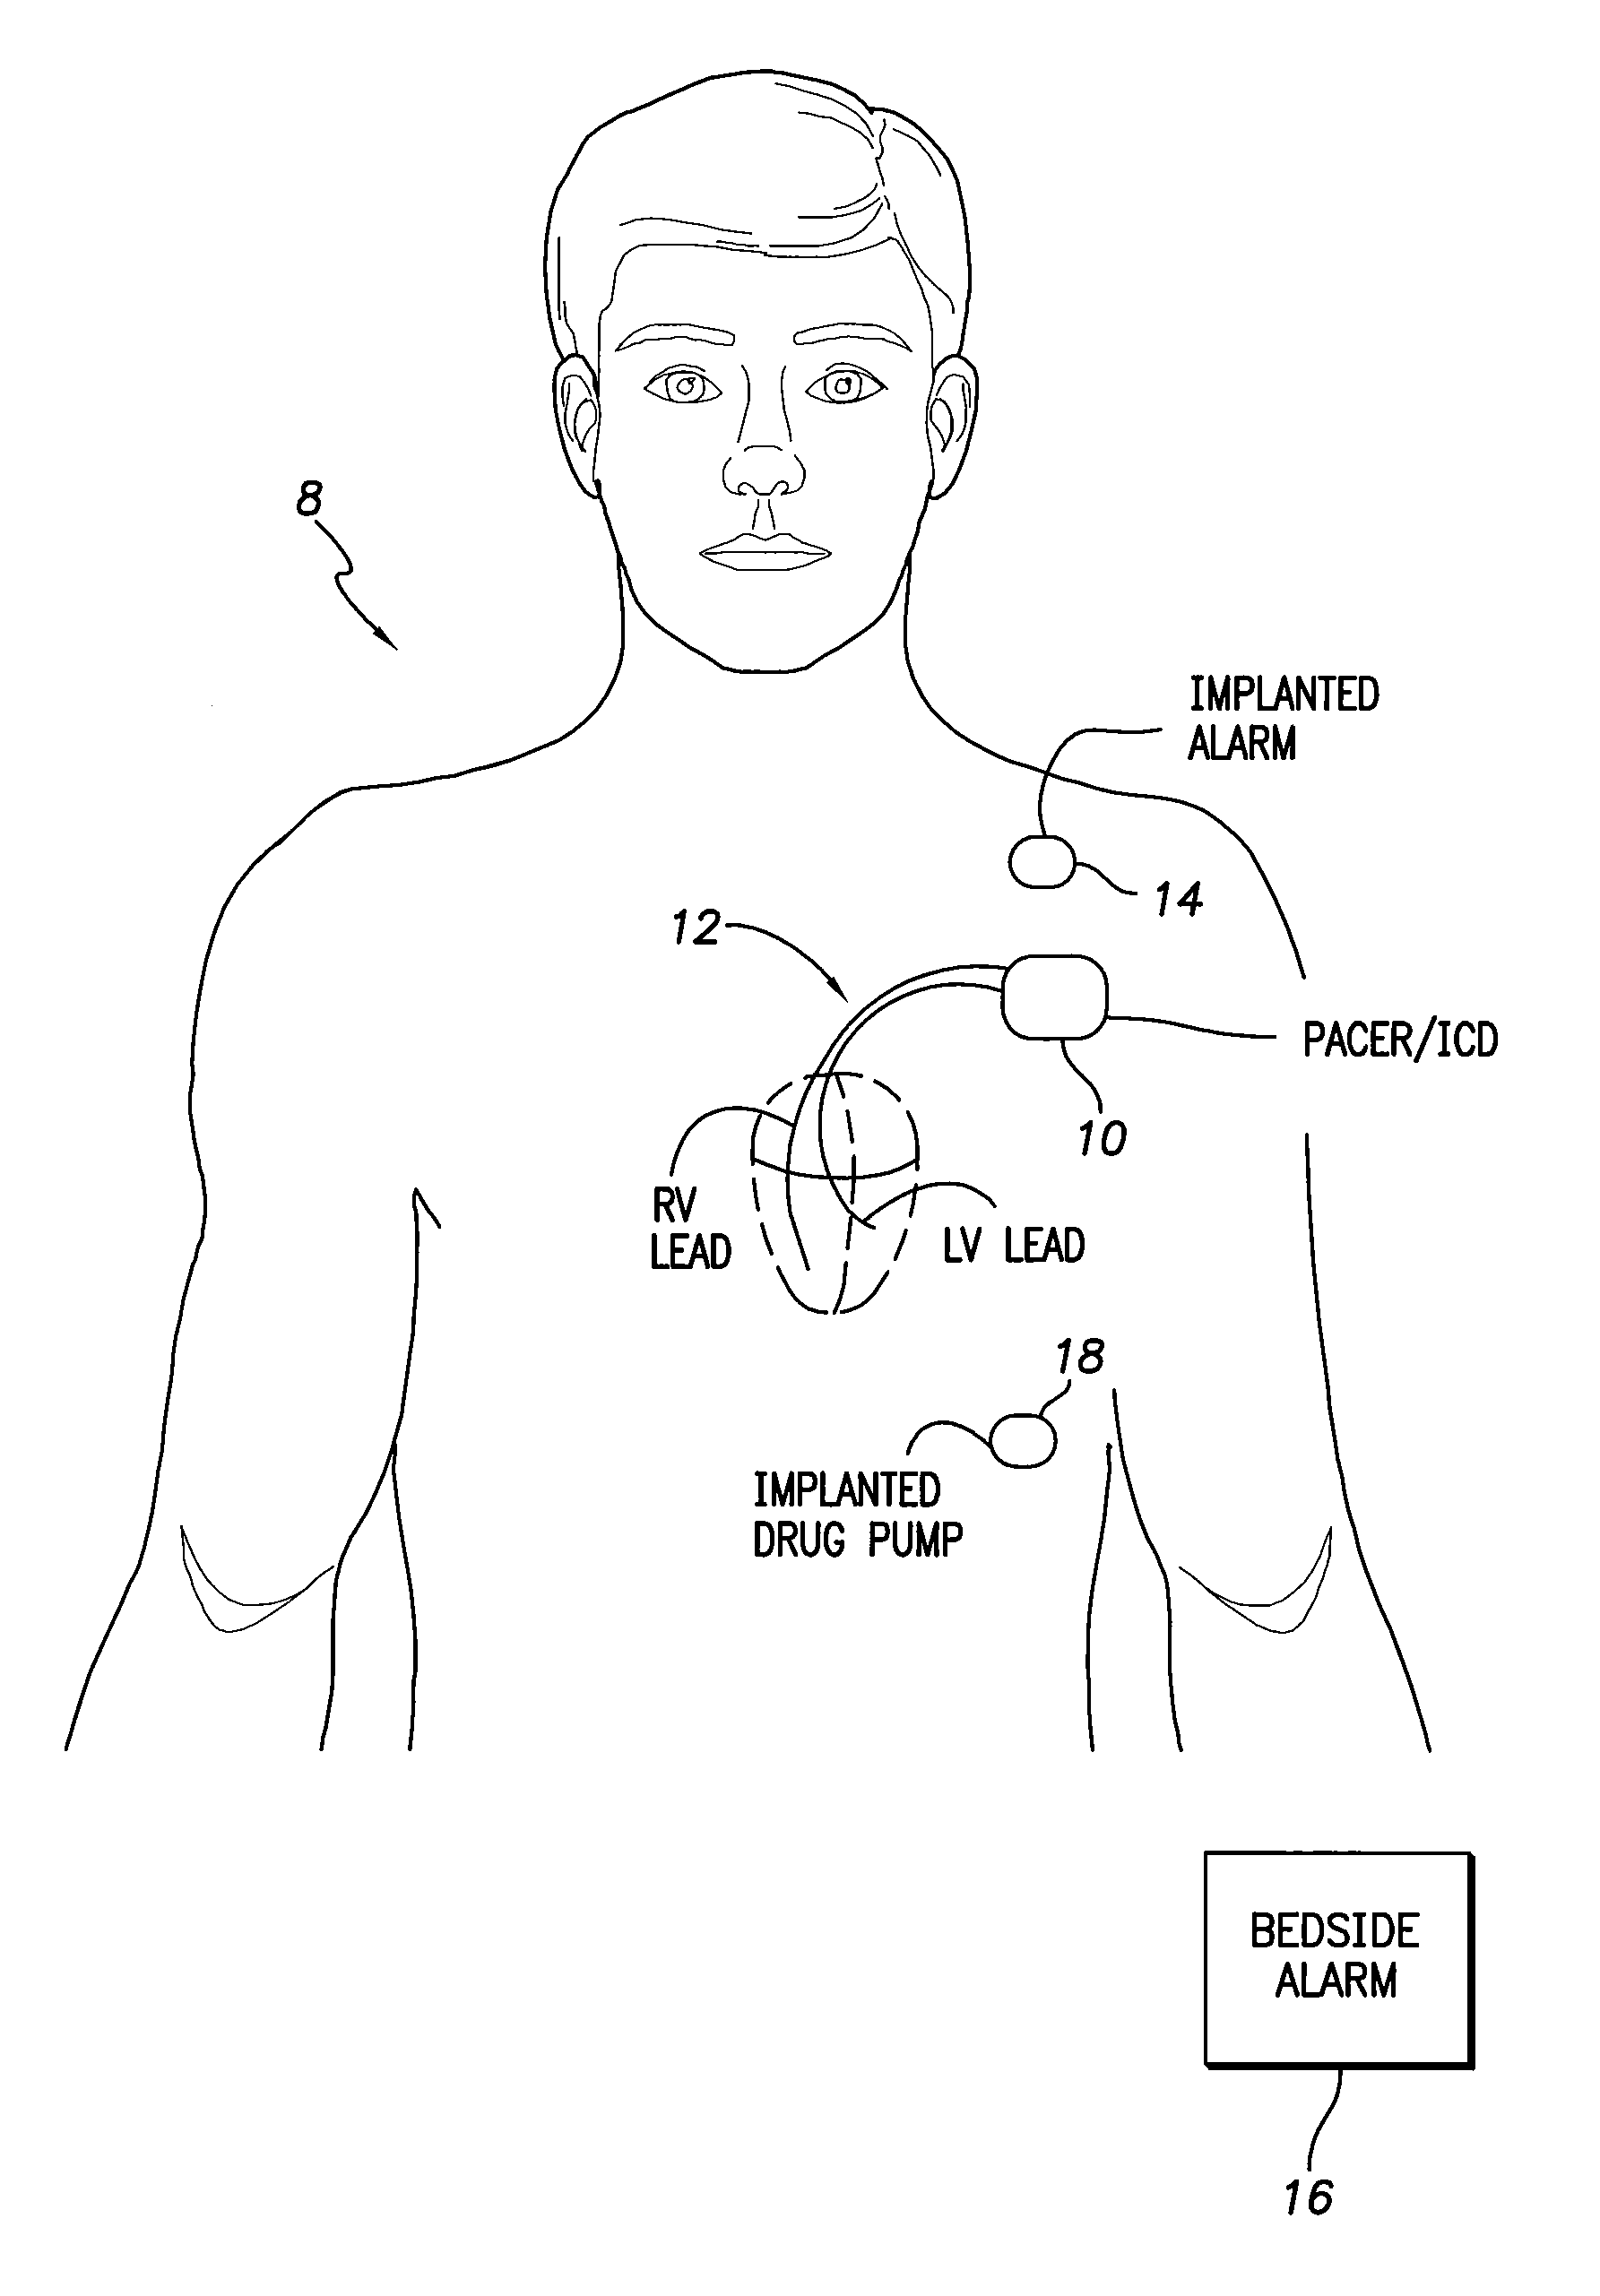 Systems and methods for detecting and compensating for changes in posture during ischemia detection a using an implantable medical device